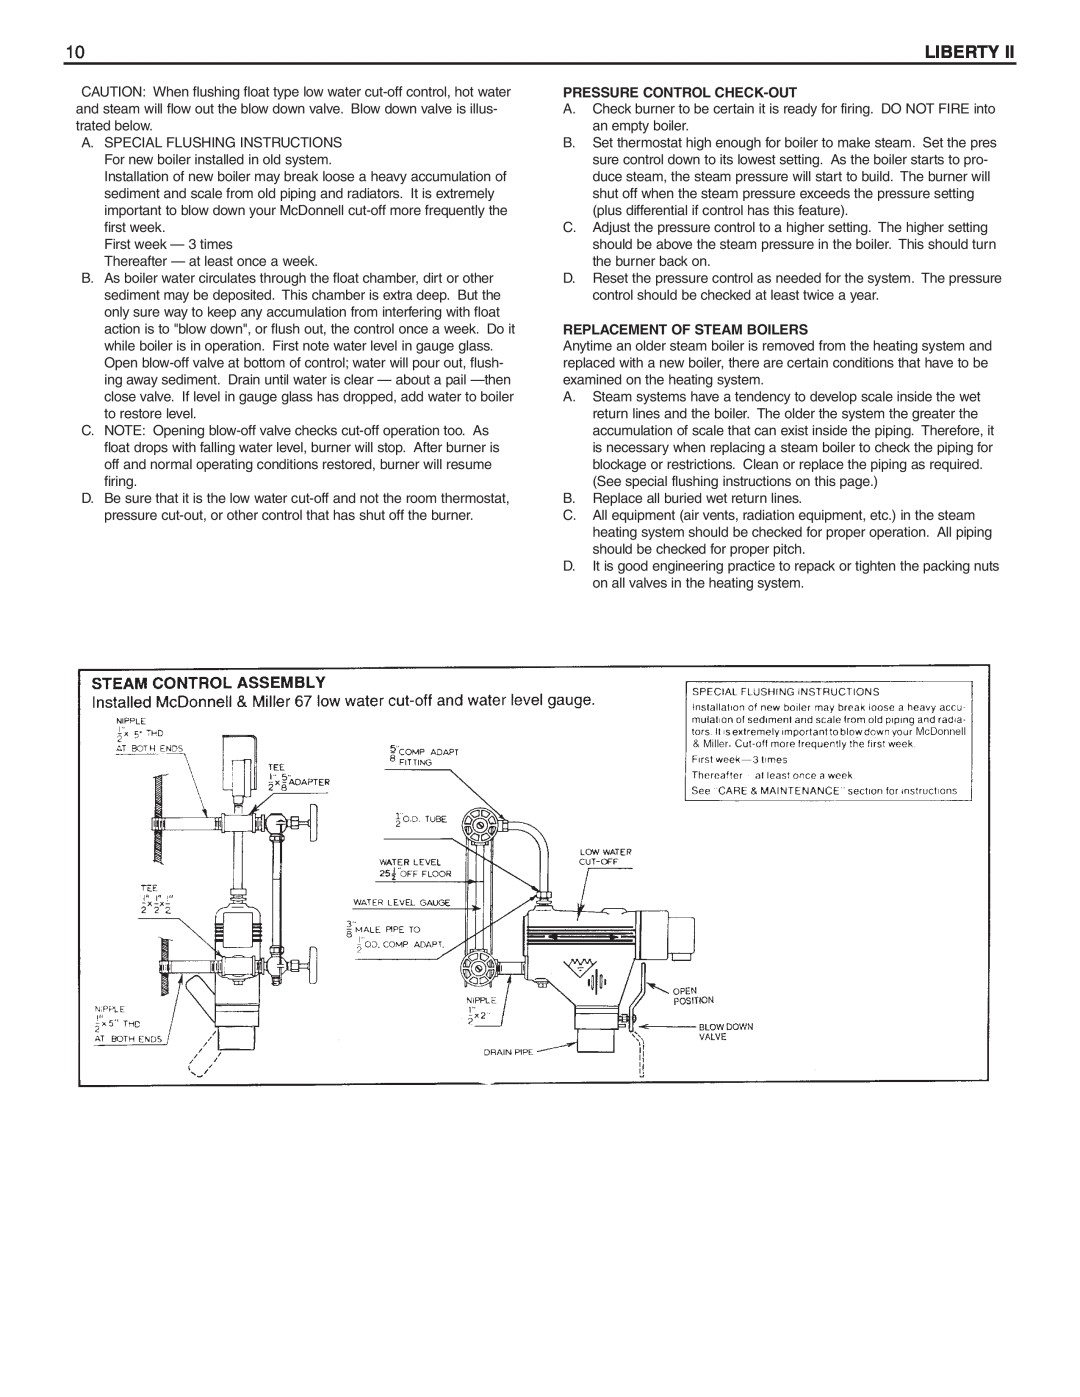 Slant/Fin BOILERS dimensions Liberty, Pressure Control Check-Out, Replacement Of Steam Boilers 